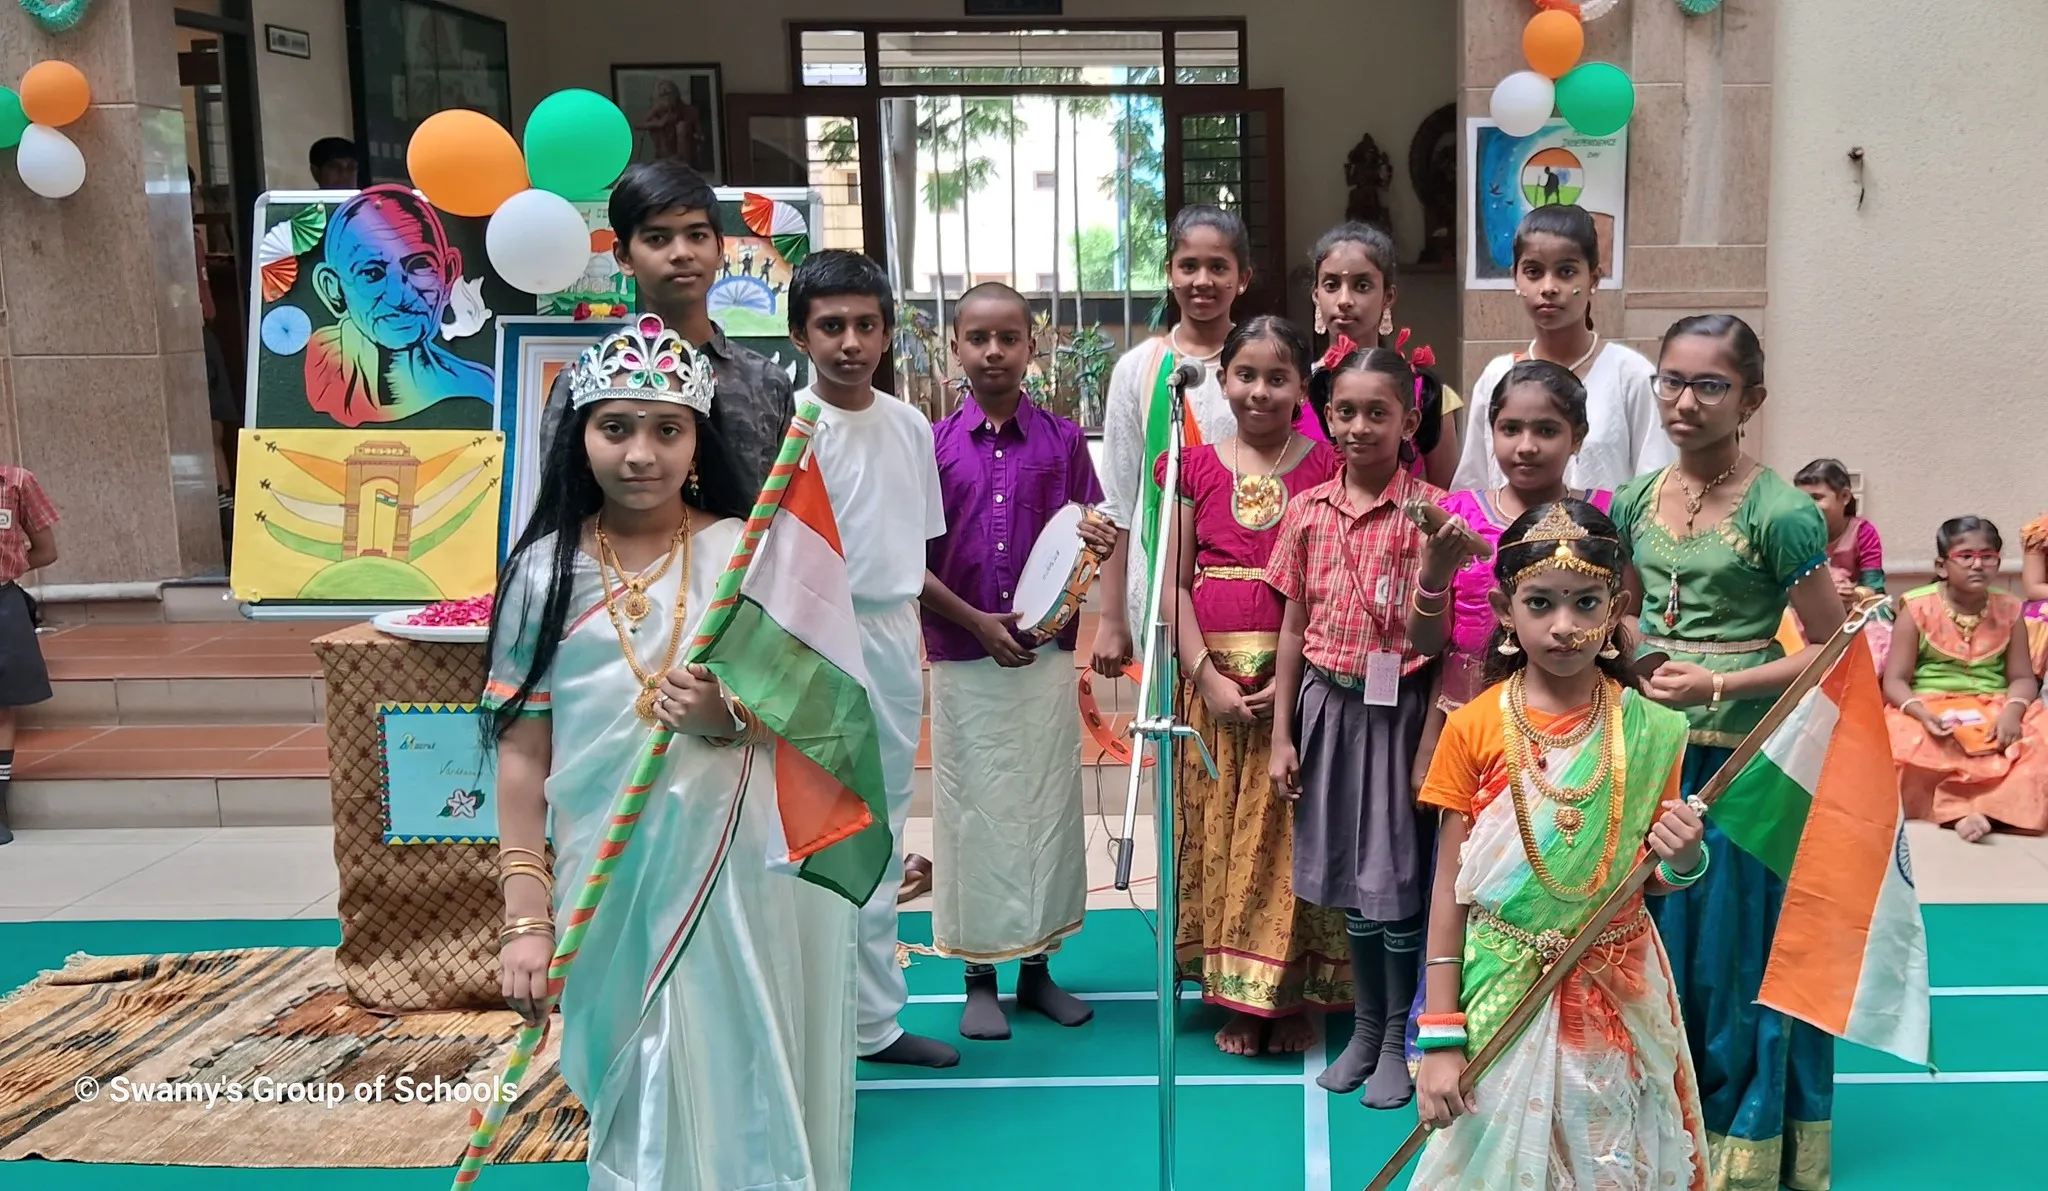 The young patriotic choir presents a song praising Bharat Mata and the spirit of freedom